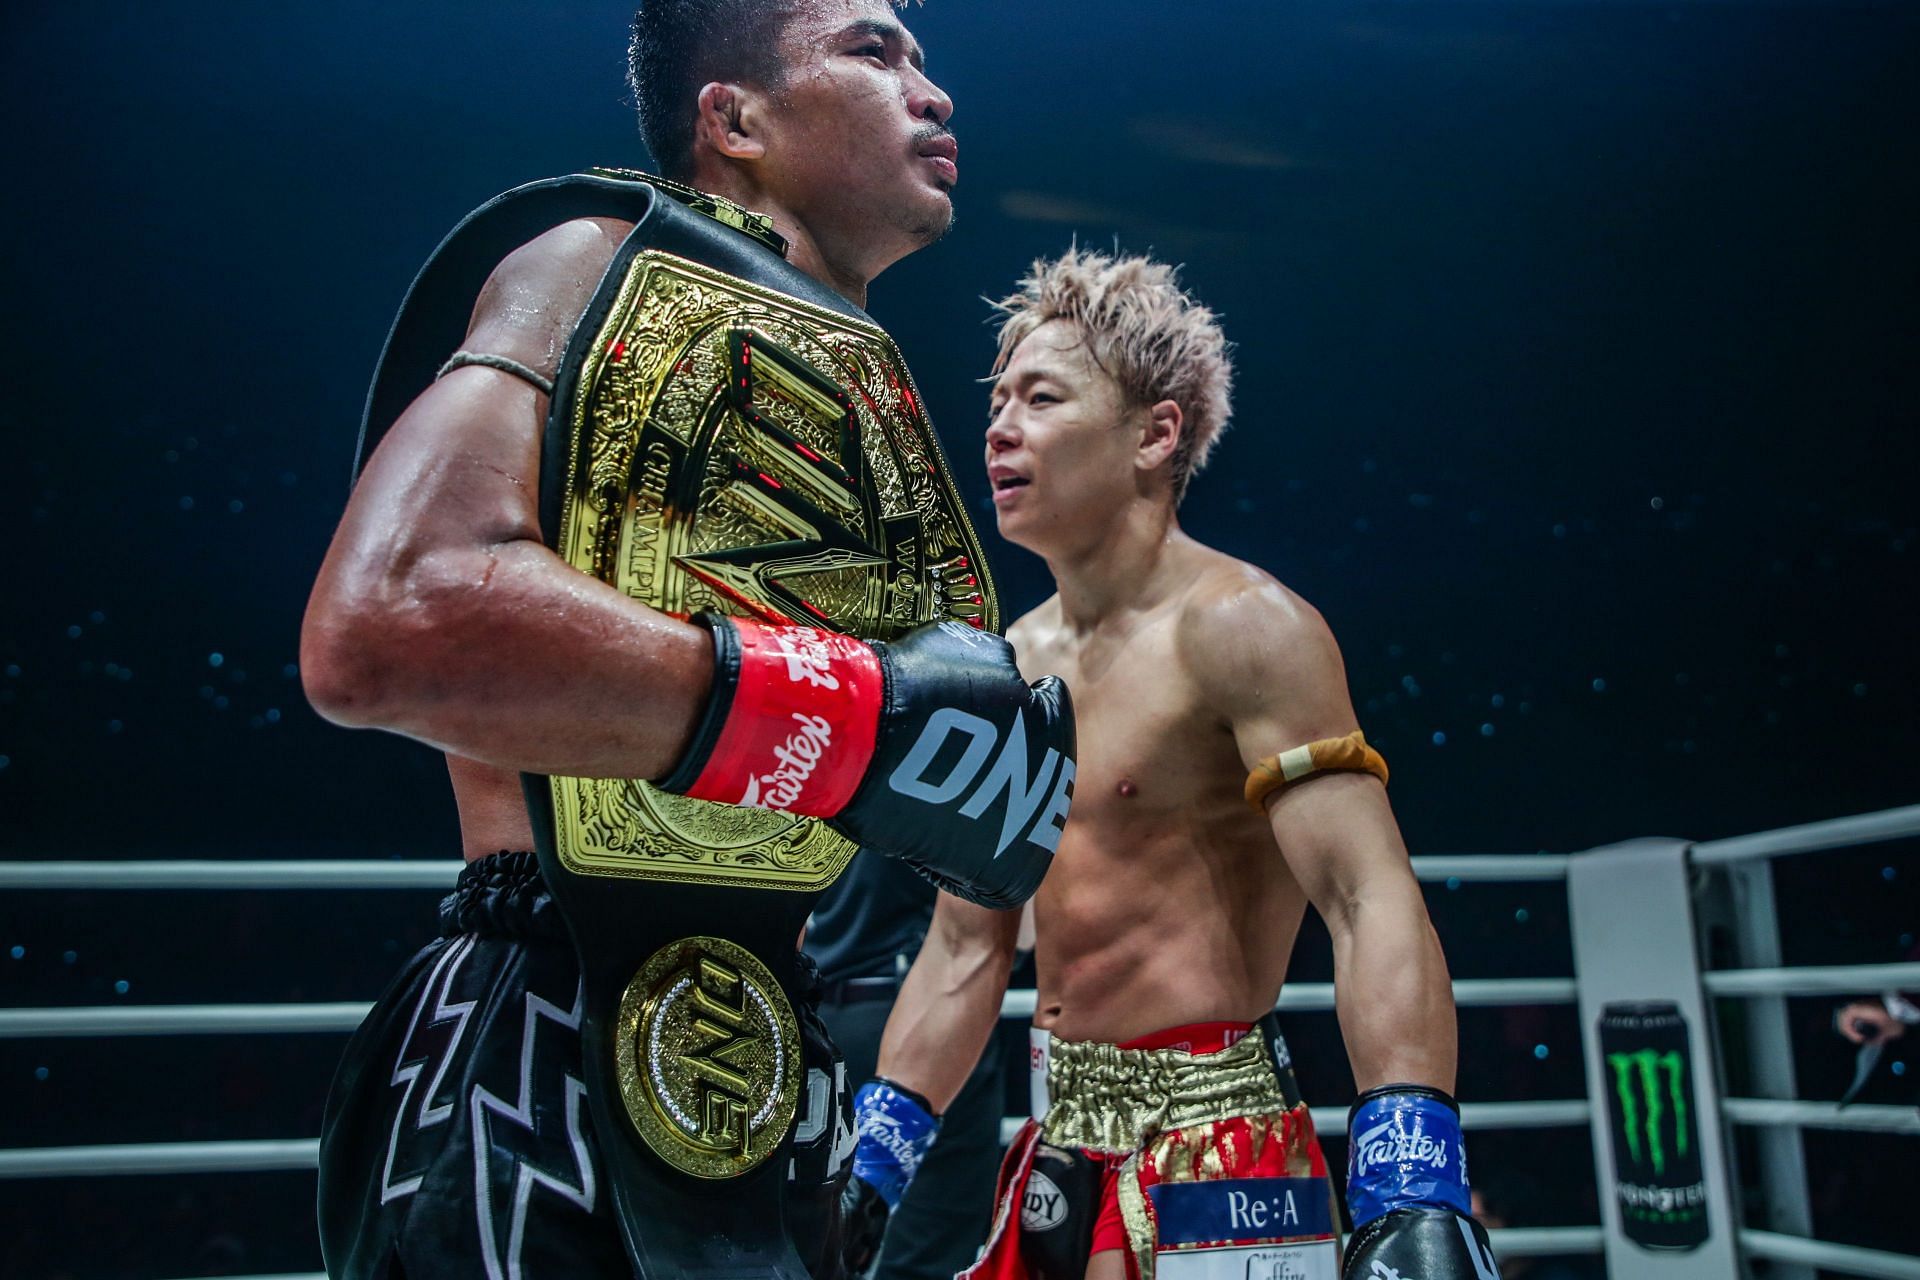 Takeru (right) congratulates Superlek after their flyweight kickboxing title fight in Tokyo.